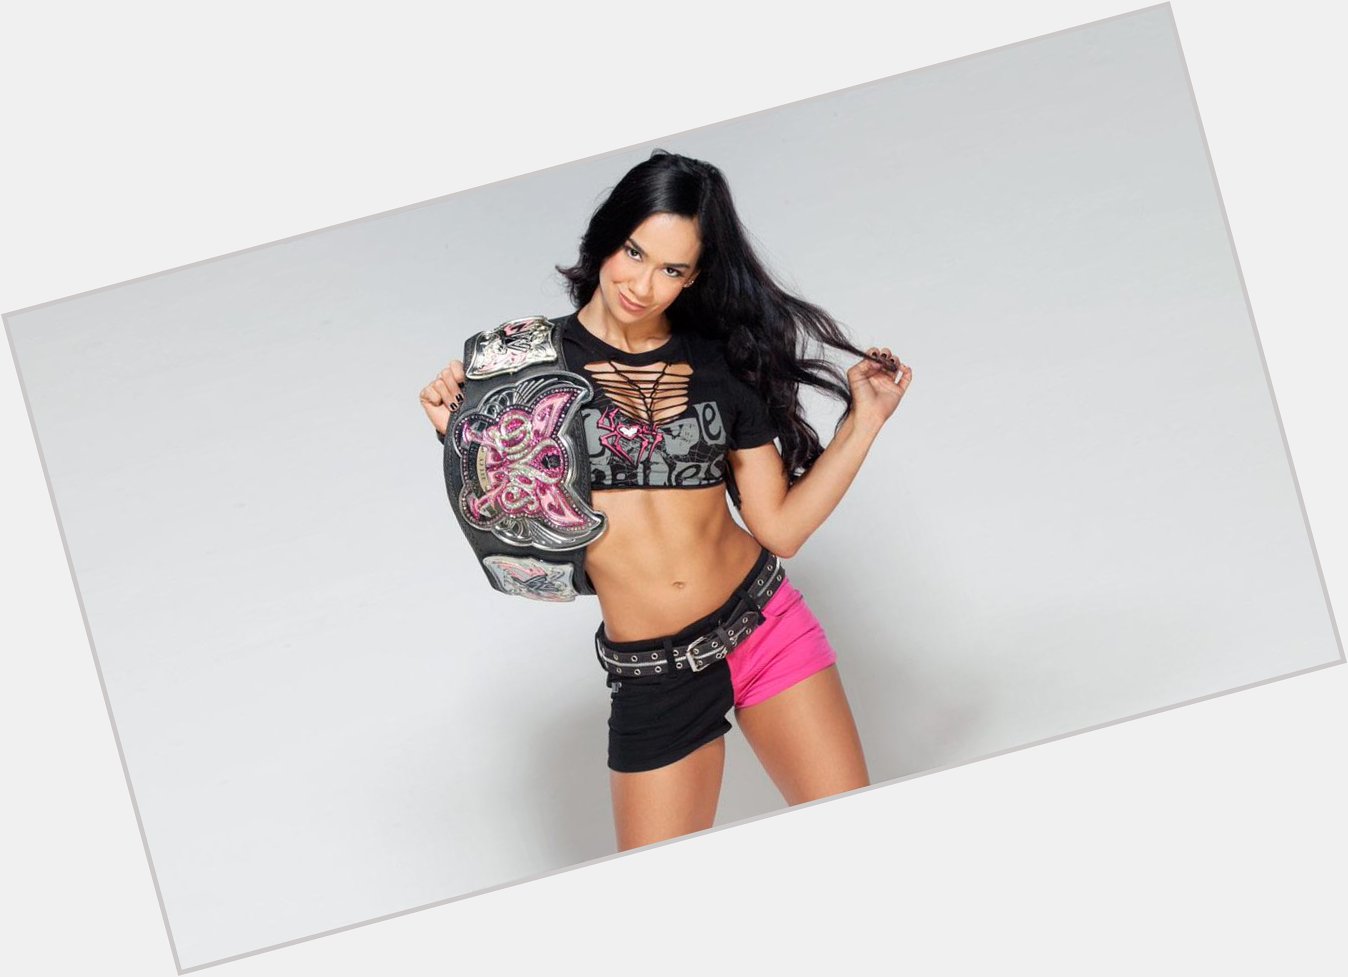 Happy Birthday to AJ Lee, who turns 28 today! 